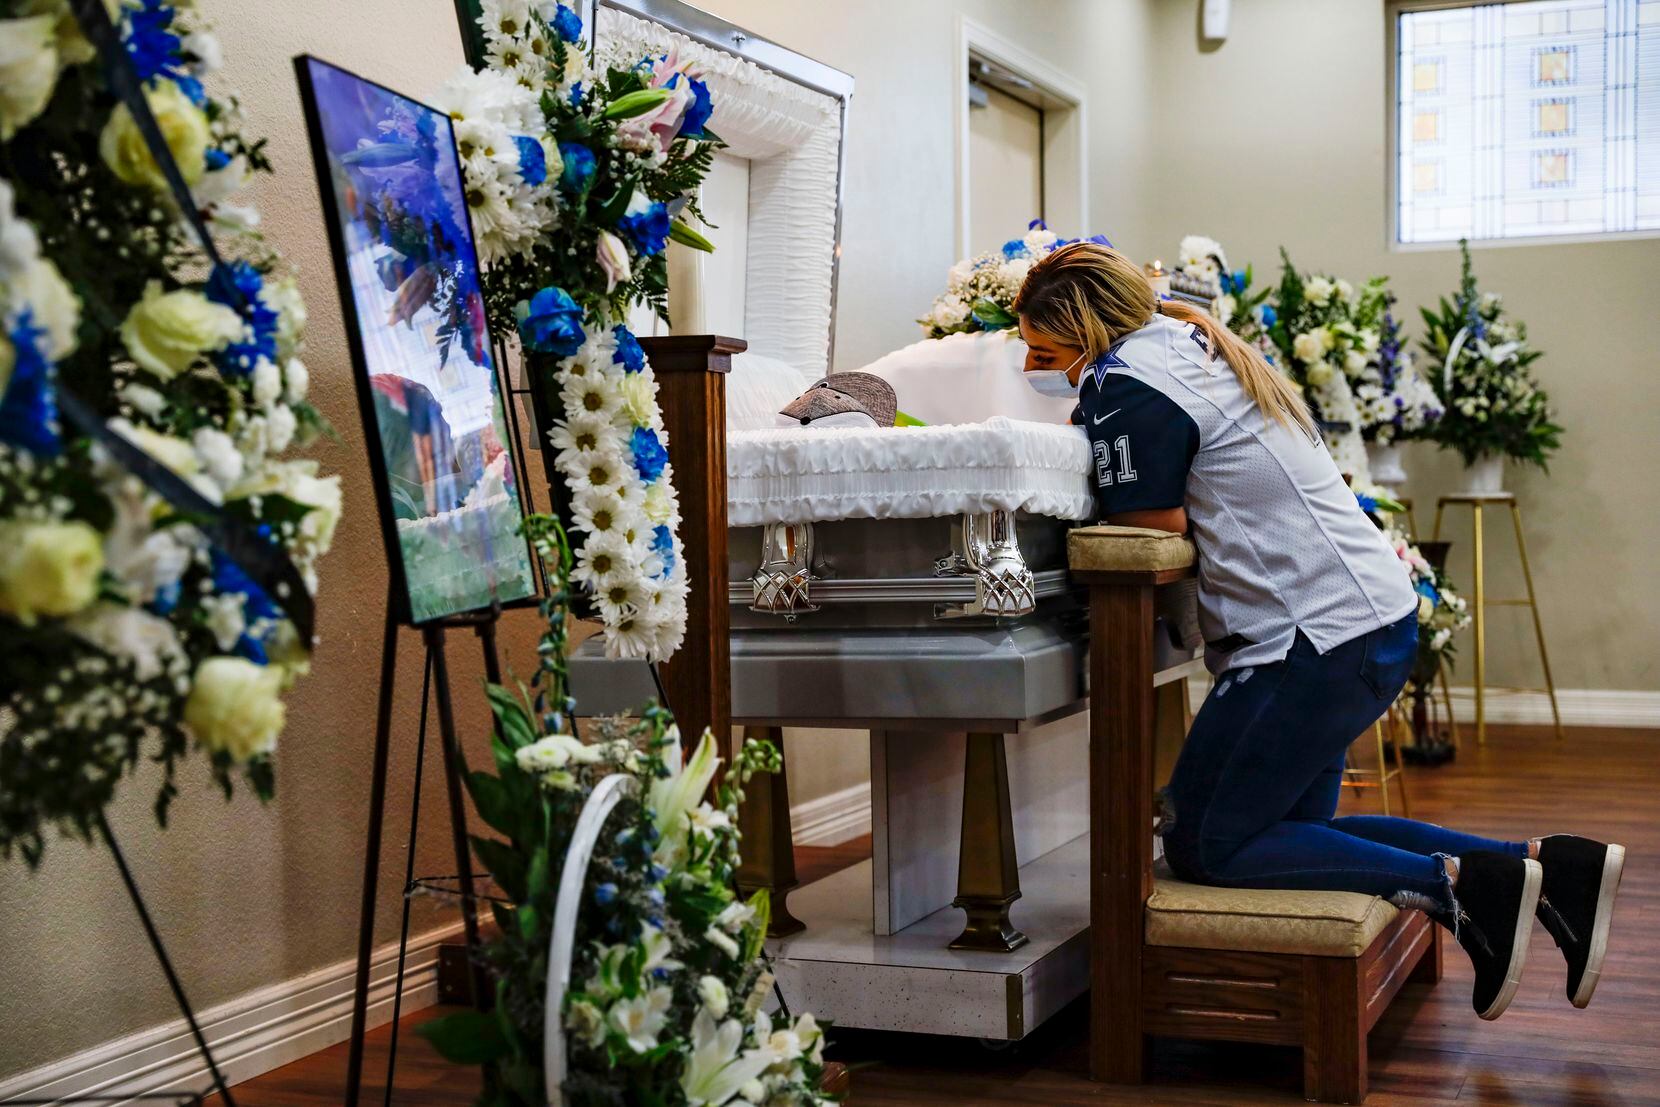 Lluneli Lopez kneeled by her son Xavier during a visitation service at Pilar Funeral Home in Garland on Wednesday, Dec. 29, 2021.